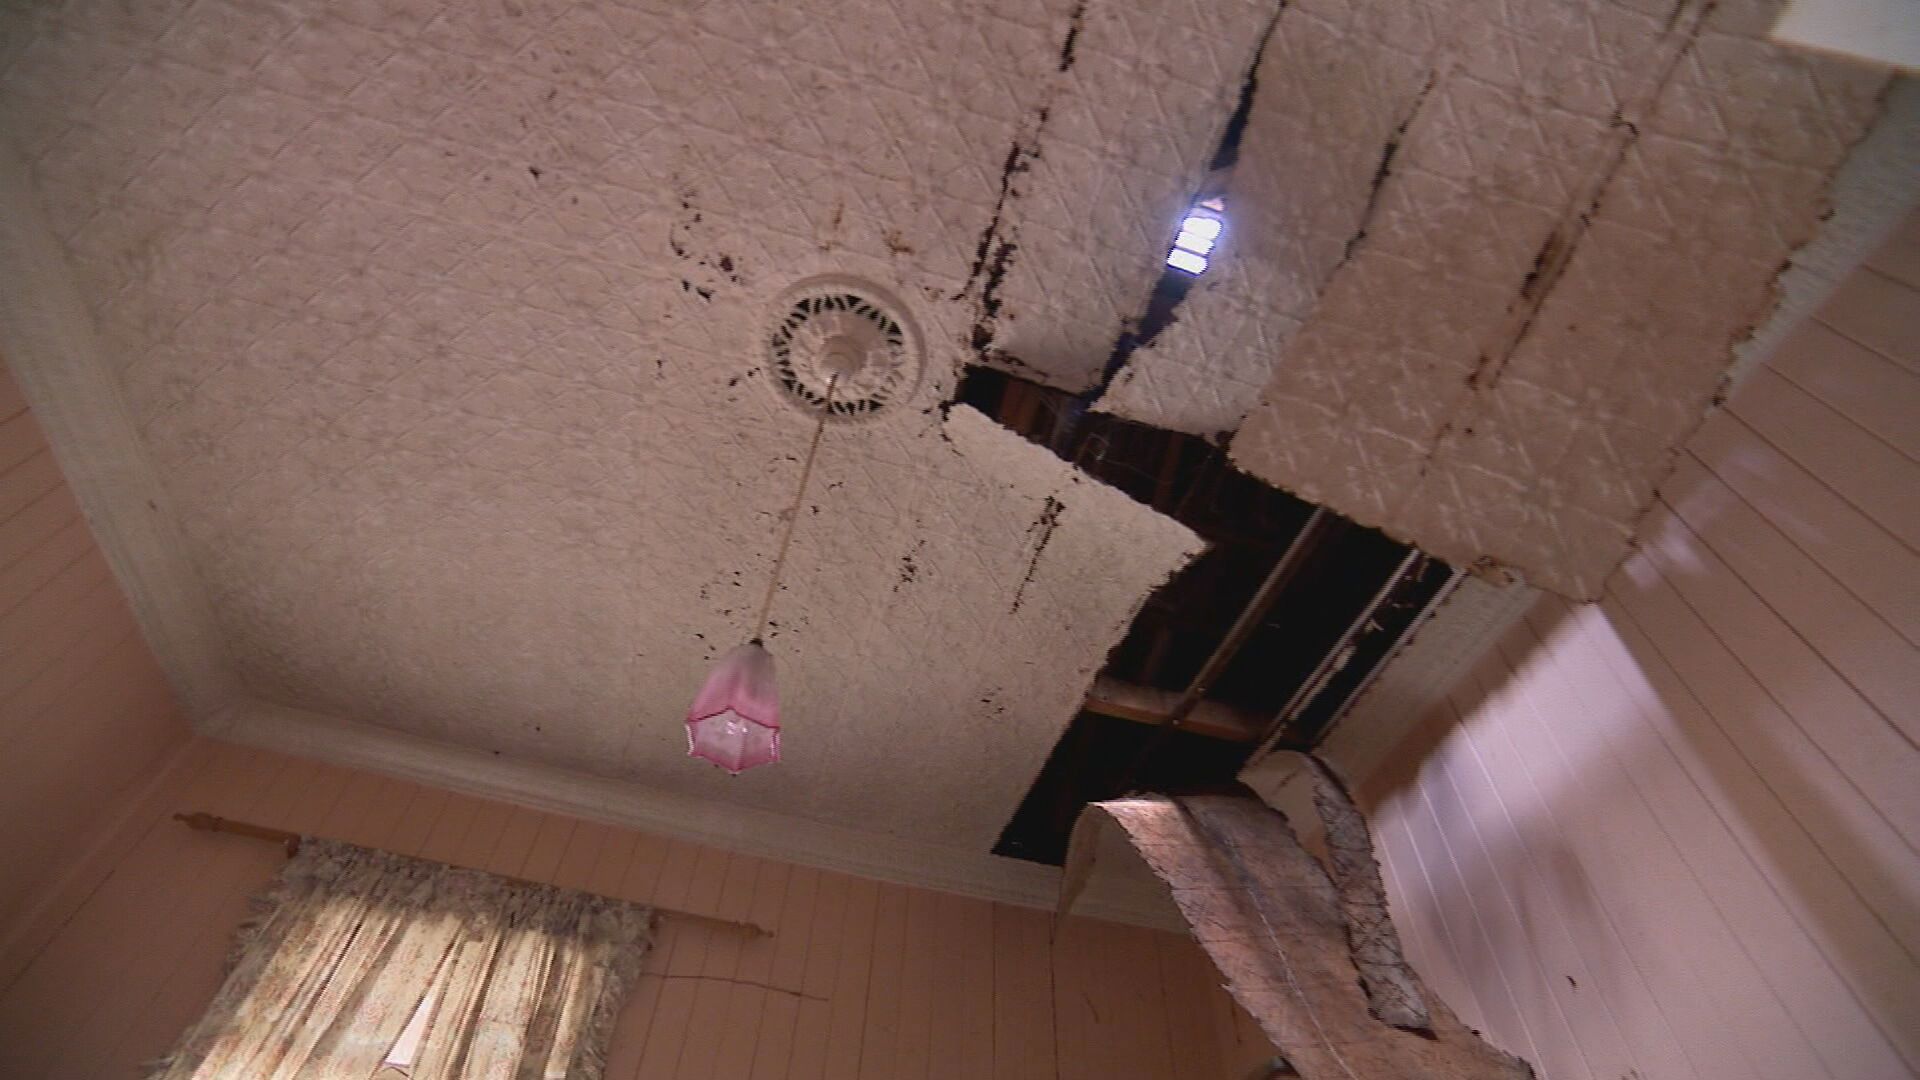 The home has holes in the roof and floor.